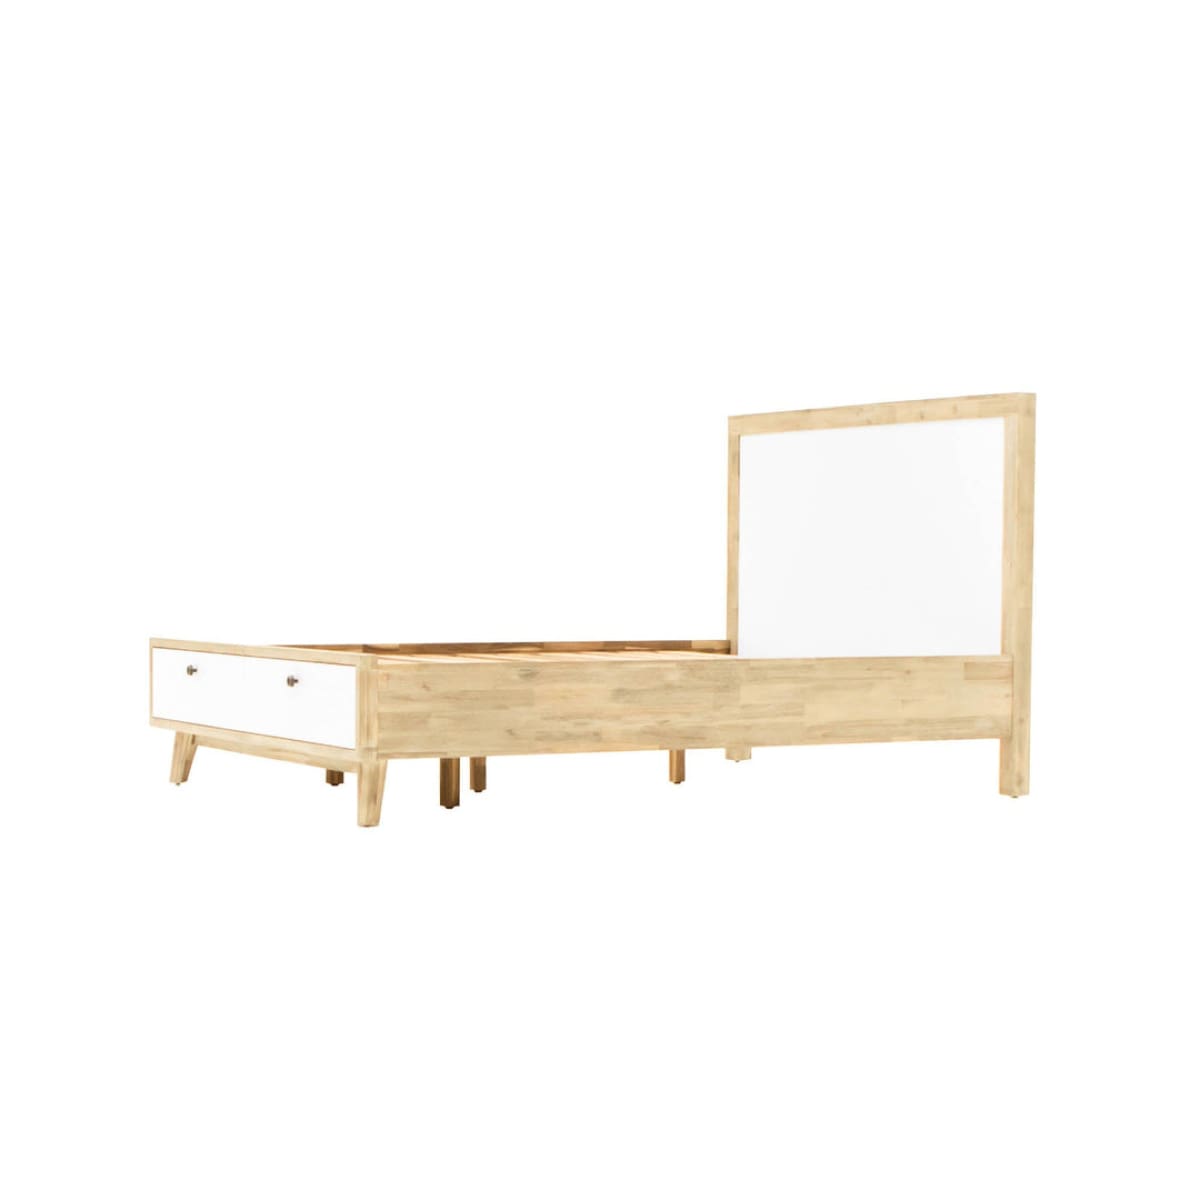 Ava King Bed - lh-import-beds